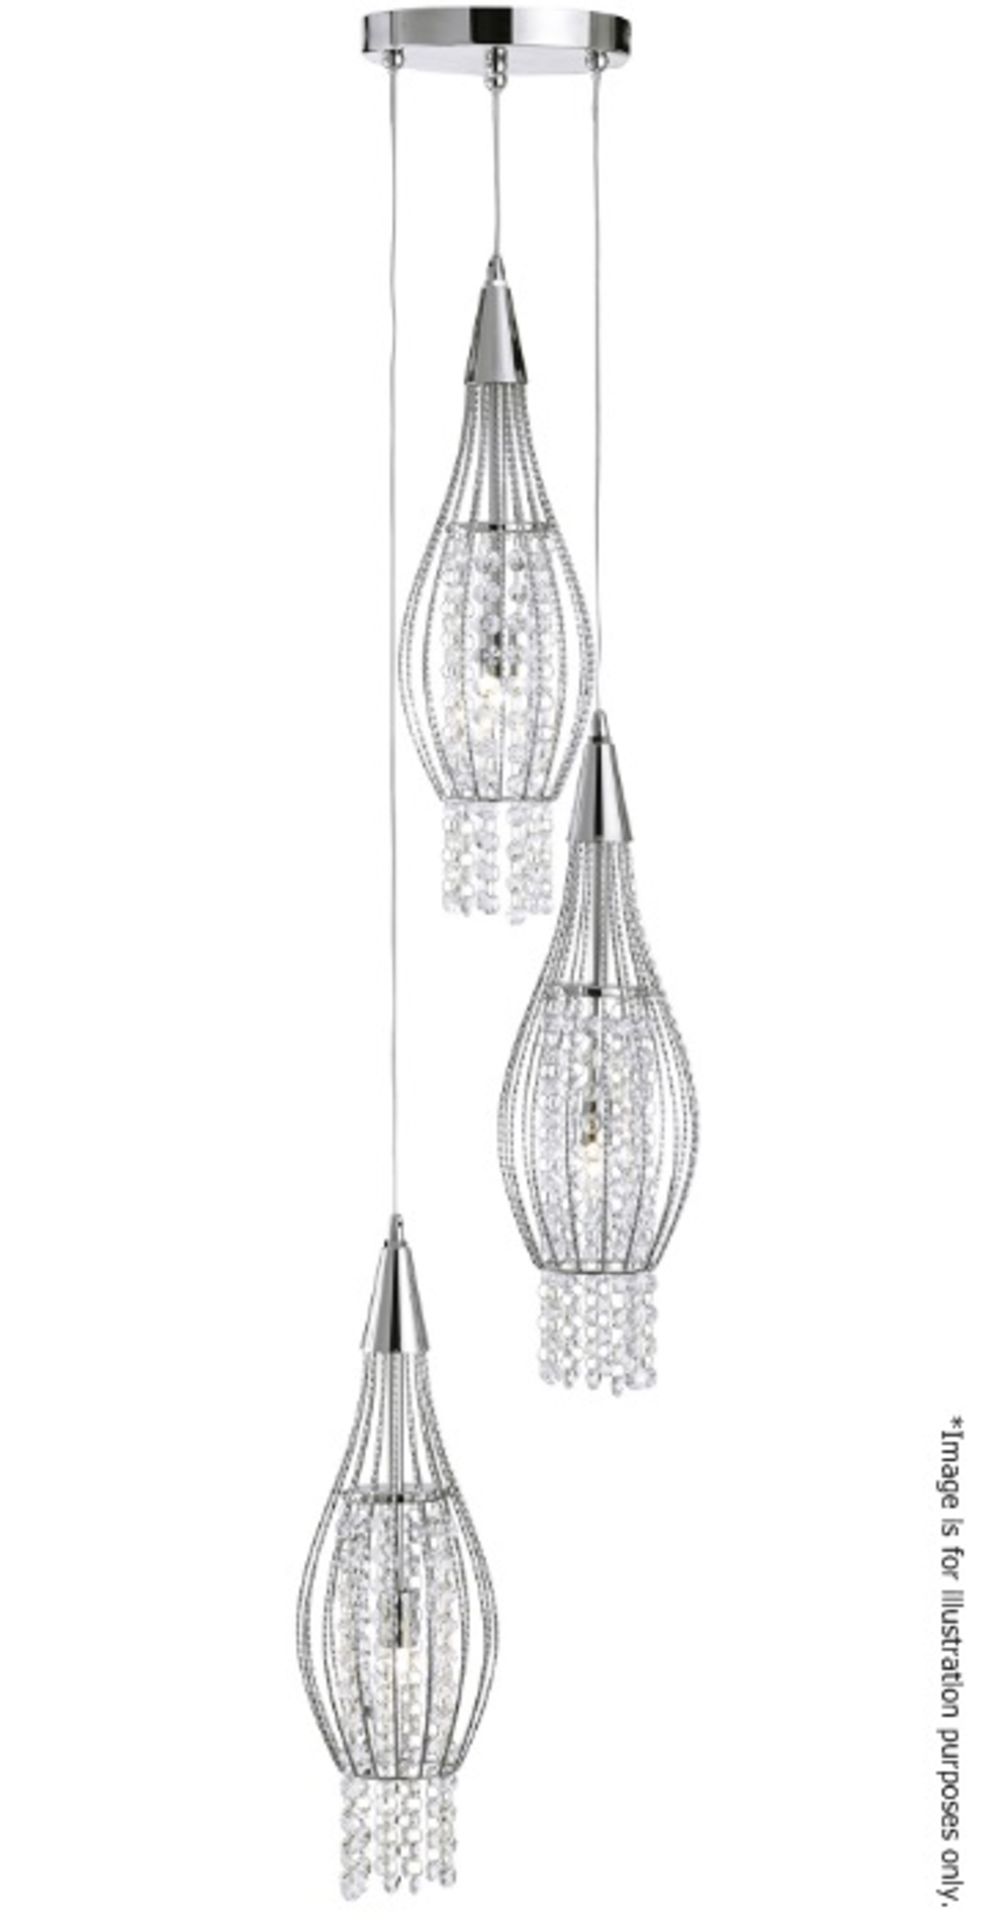 1 x Rocket Chrome 3-Light Cage Multi-drop Pendant Light With Clear Crystal Buttons - RRP £228.00